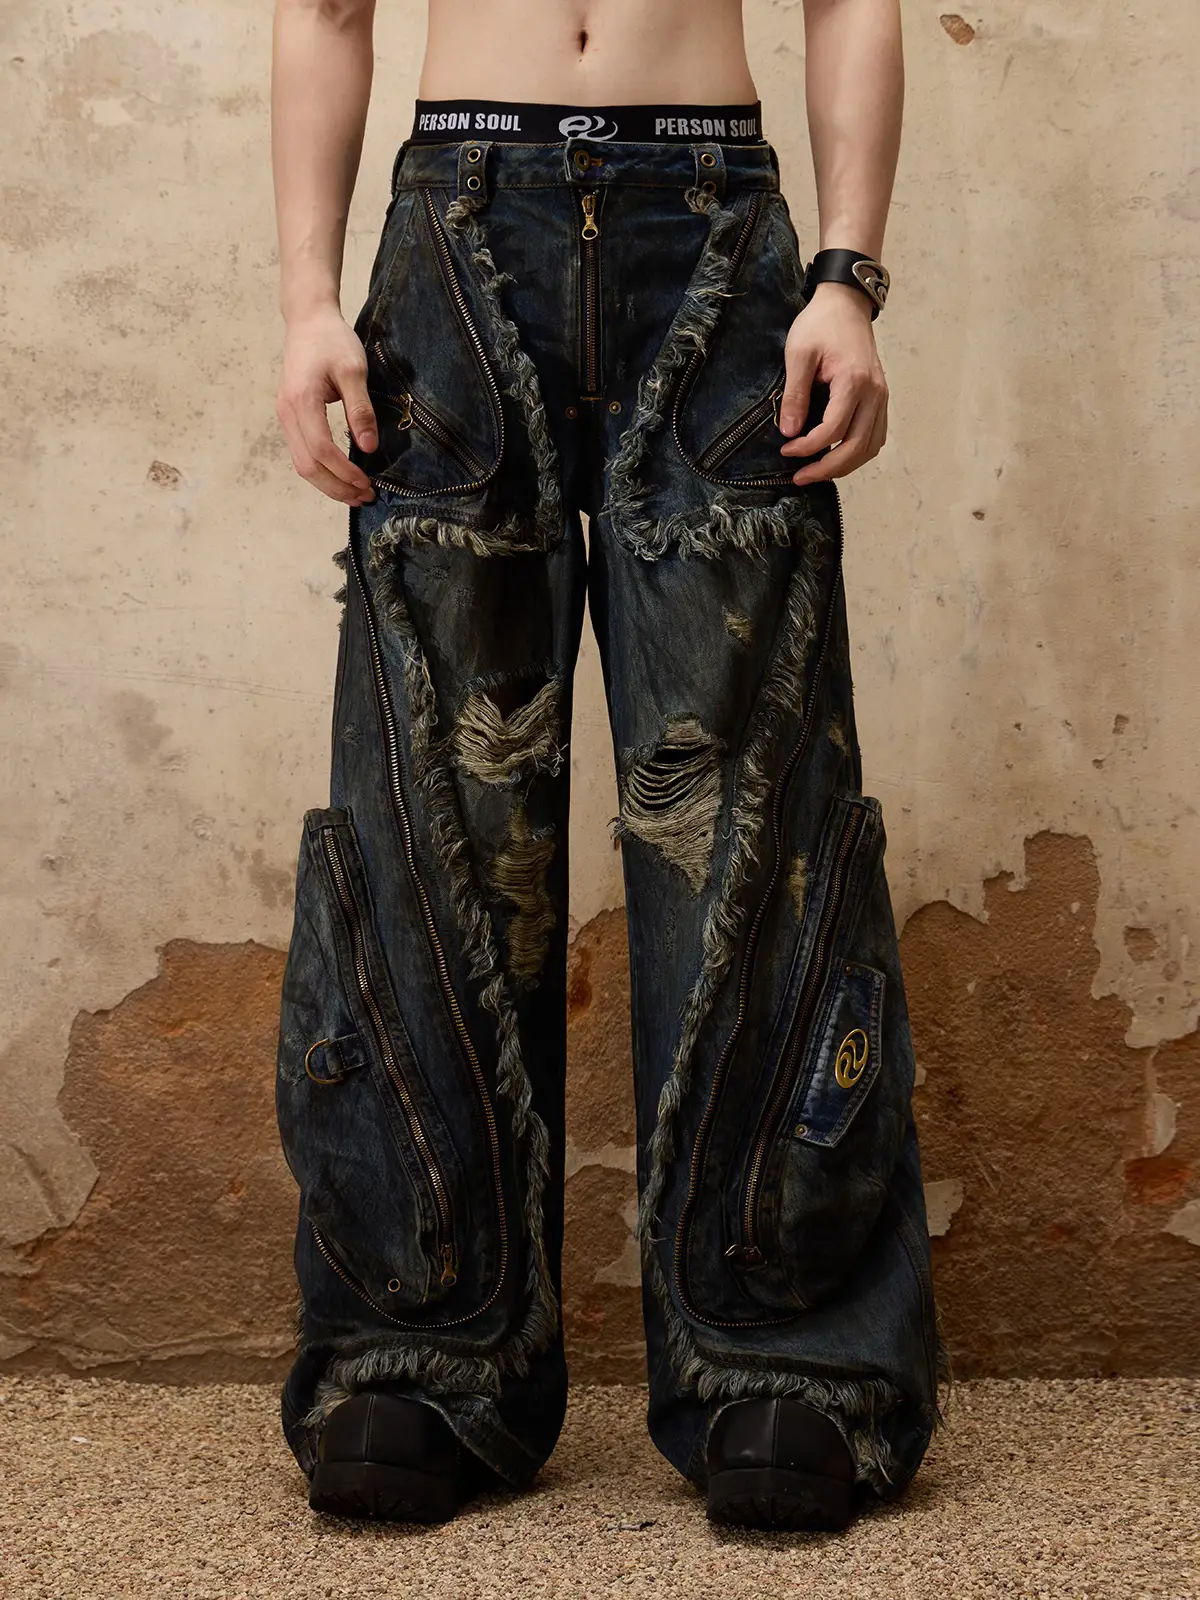 Dirty Denim Jeans | Gallery posted by PERSONSOUL | Lemon8